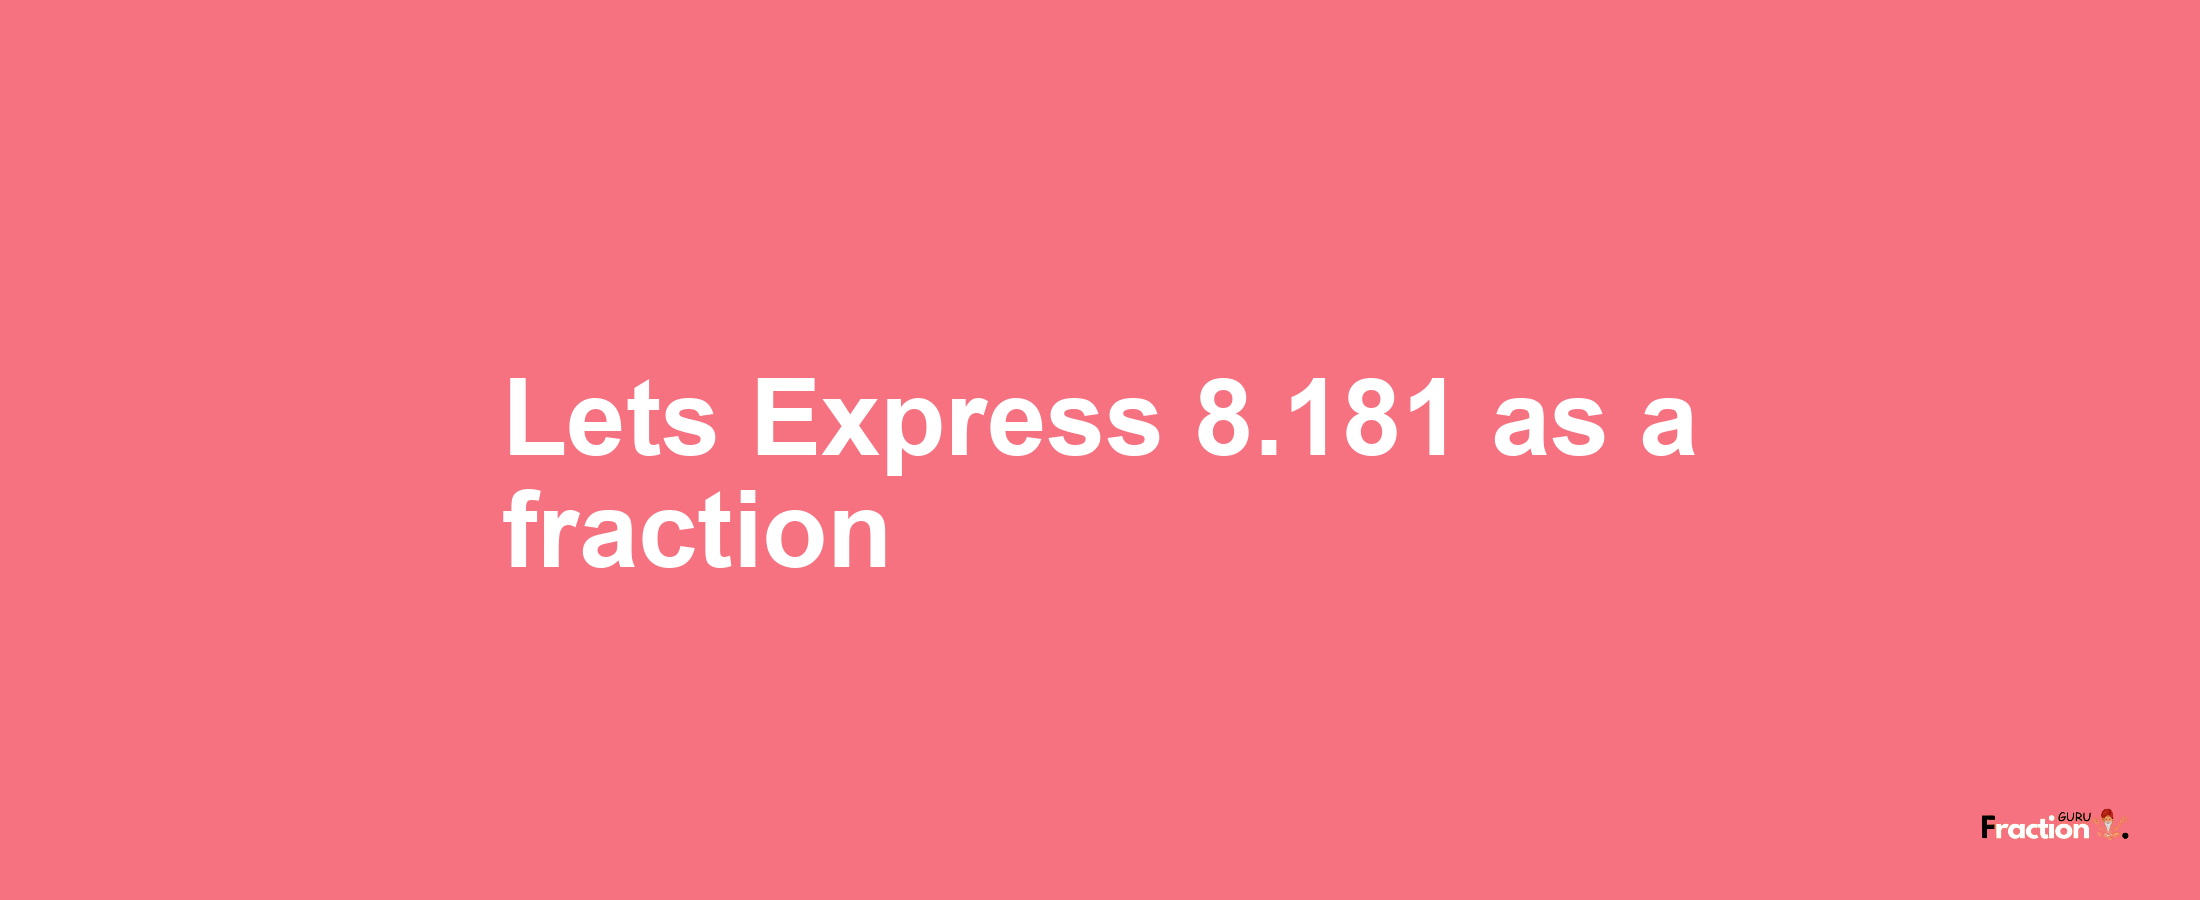 Lets Express 8.181 as afraction